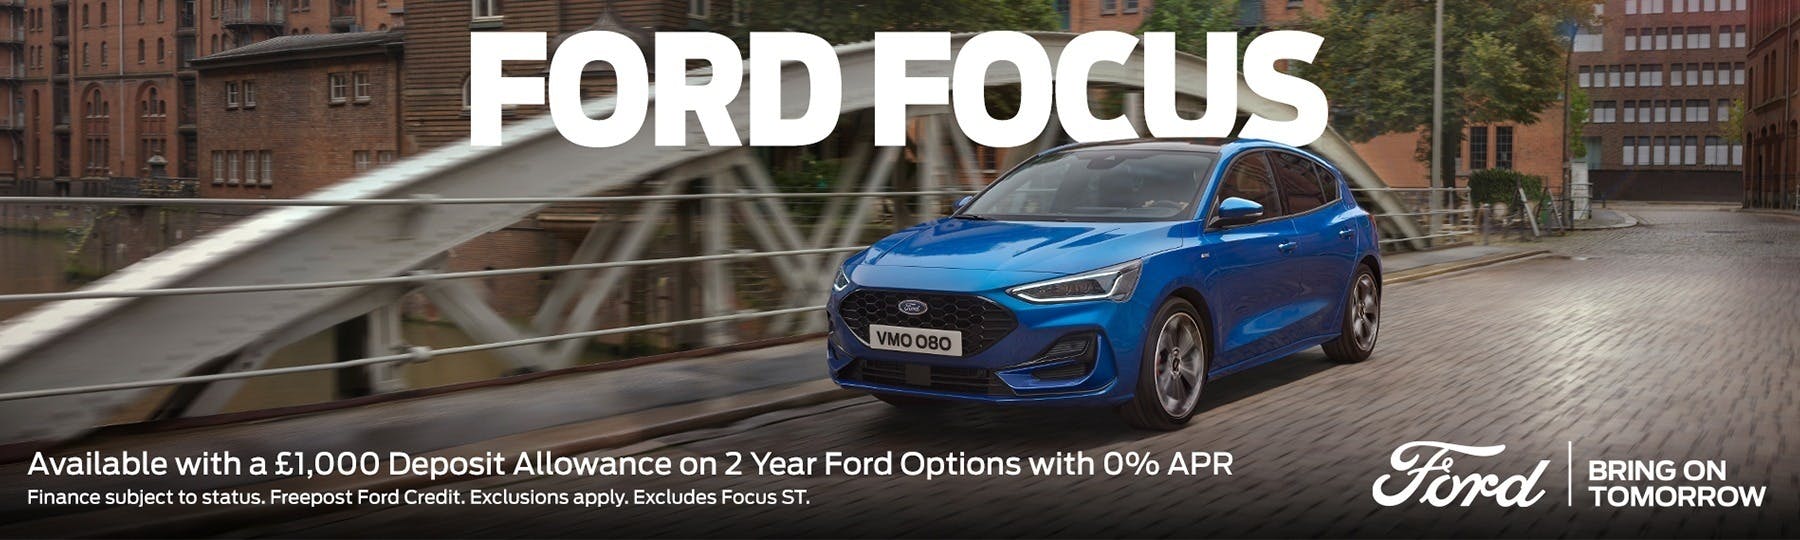 New Ford Focus New Car Offer